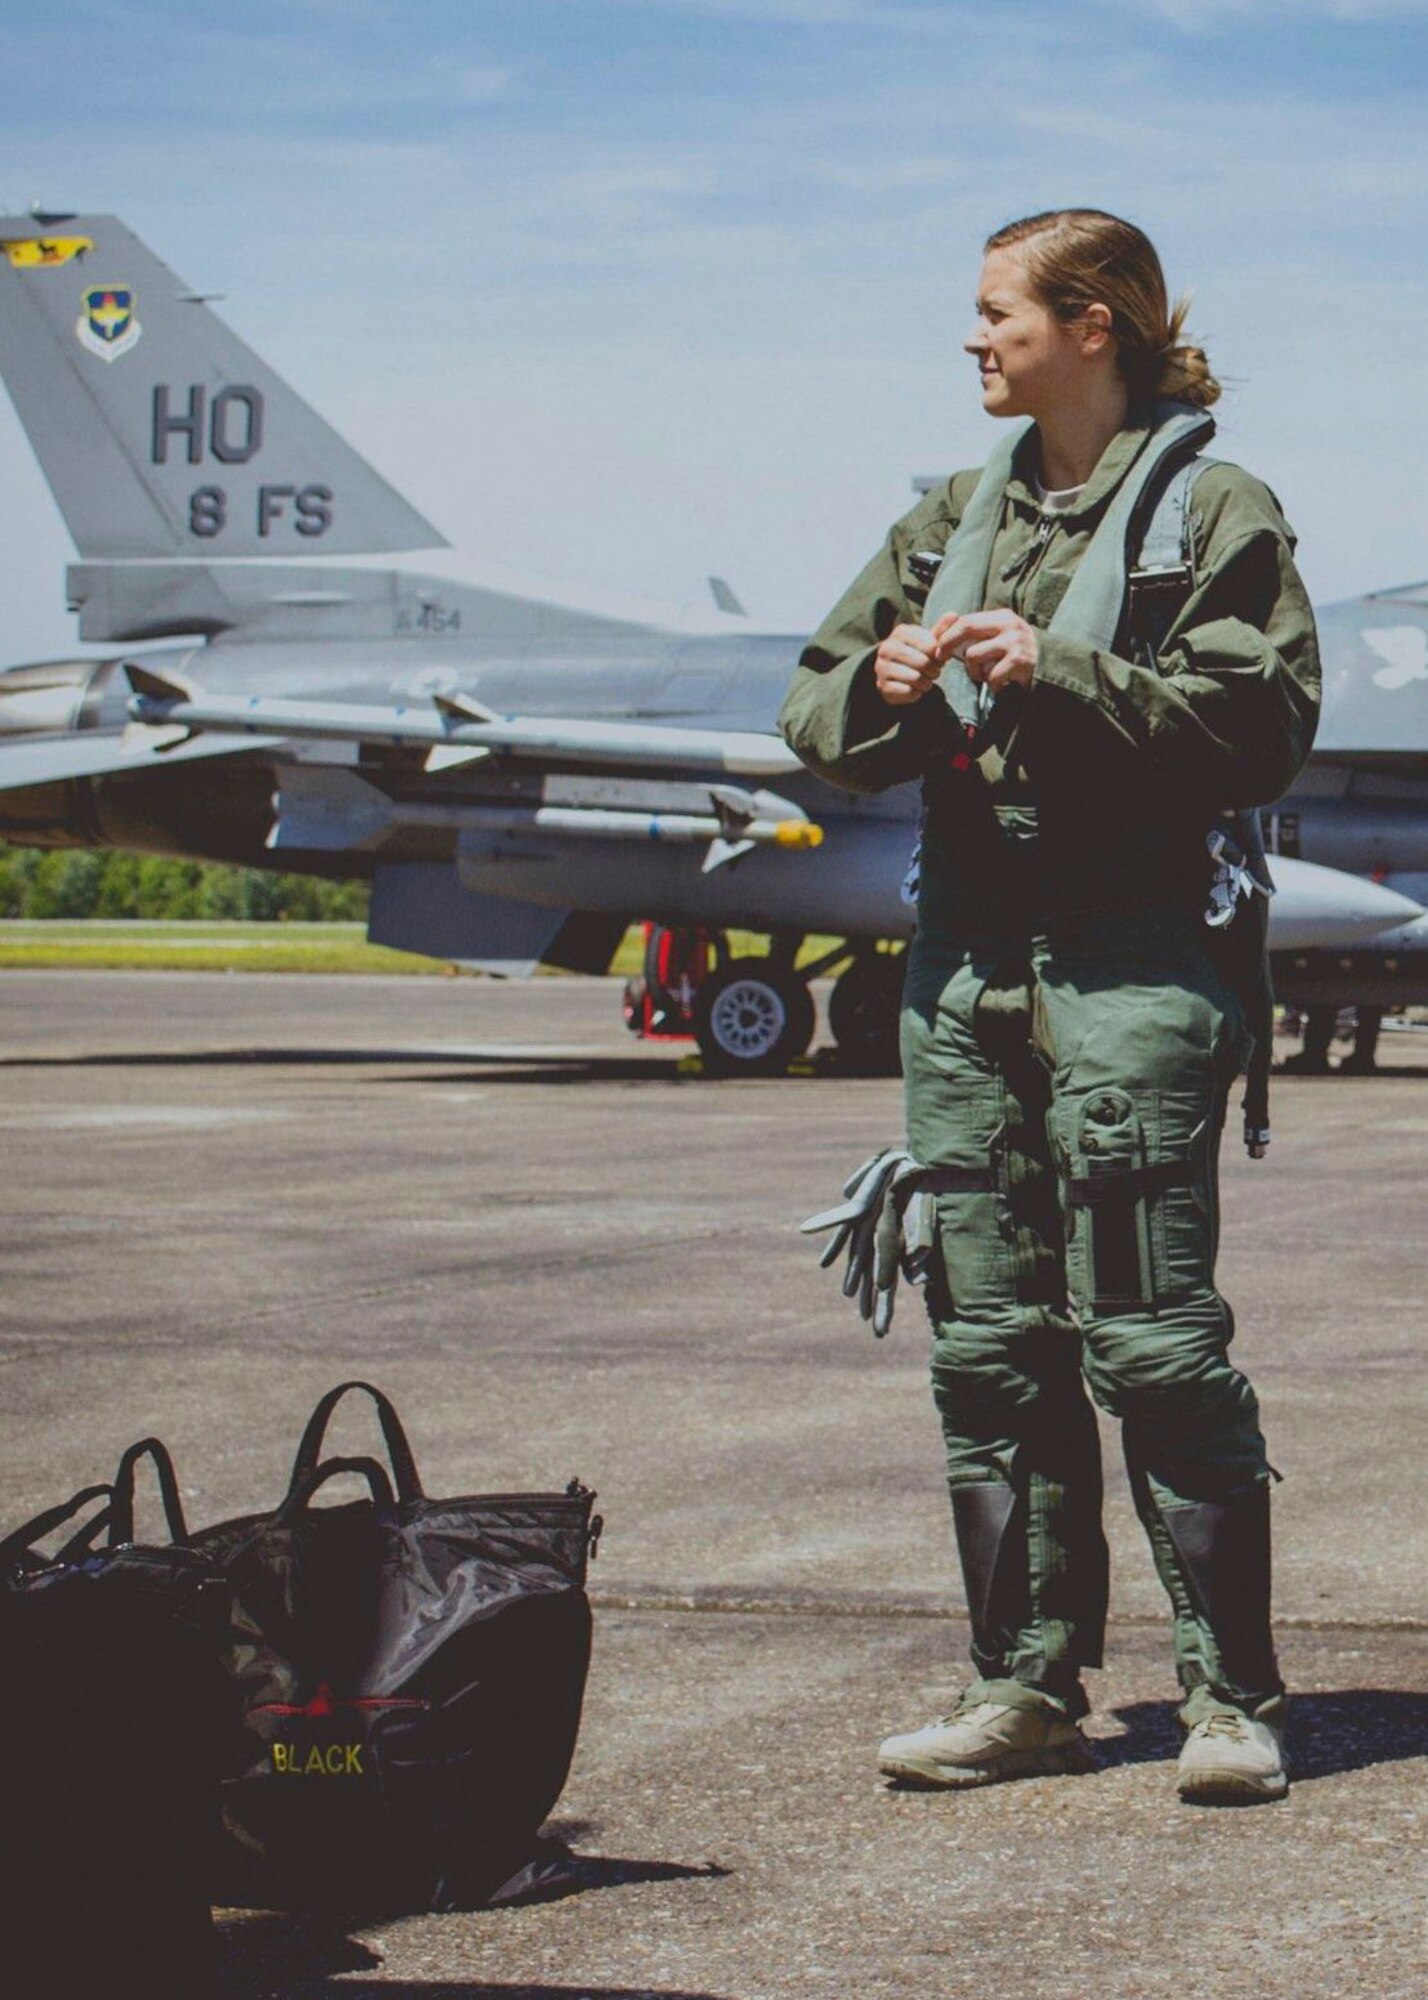 U.S. Air Force Airman Samantha Anderson, 54th Operations Support Squadron Aircrew Flight Equipment apprentice, prepares for a familiarization flight in an F-16 Fighting Falcon during a temporary duty assignment with the 8th Fighter Squadron, March 29, 2019 to April 12, 2019, at Naval Air Station Joint Reserve Base New Orleans, La. Anderson said the FAM flight was invaluable to her AFE career, because she now knows exactly how fliers need to be fitted. (Courtesy photo)